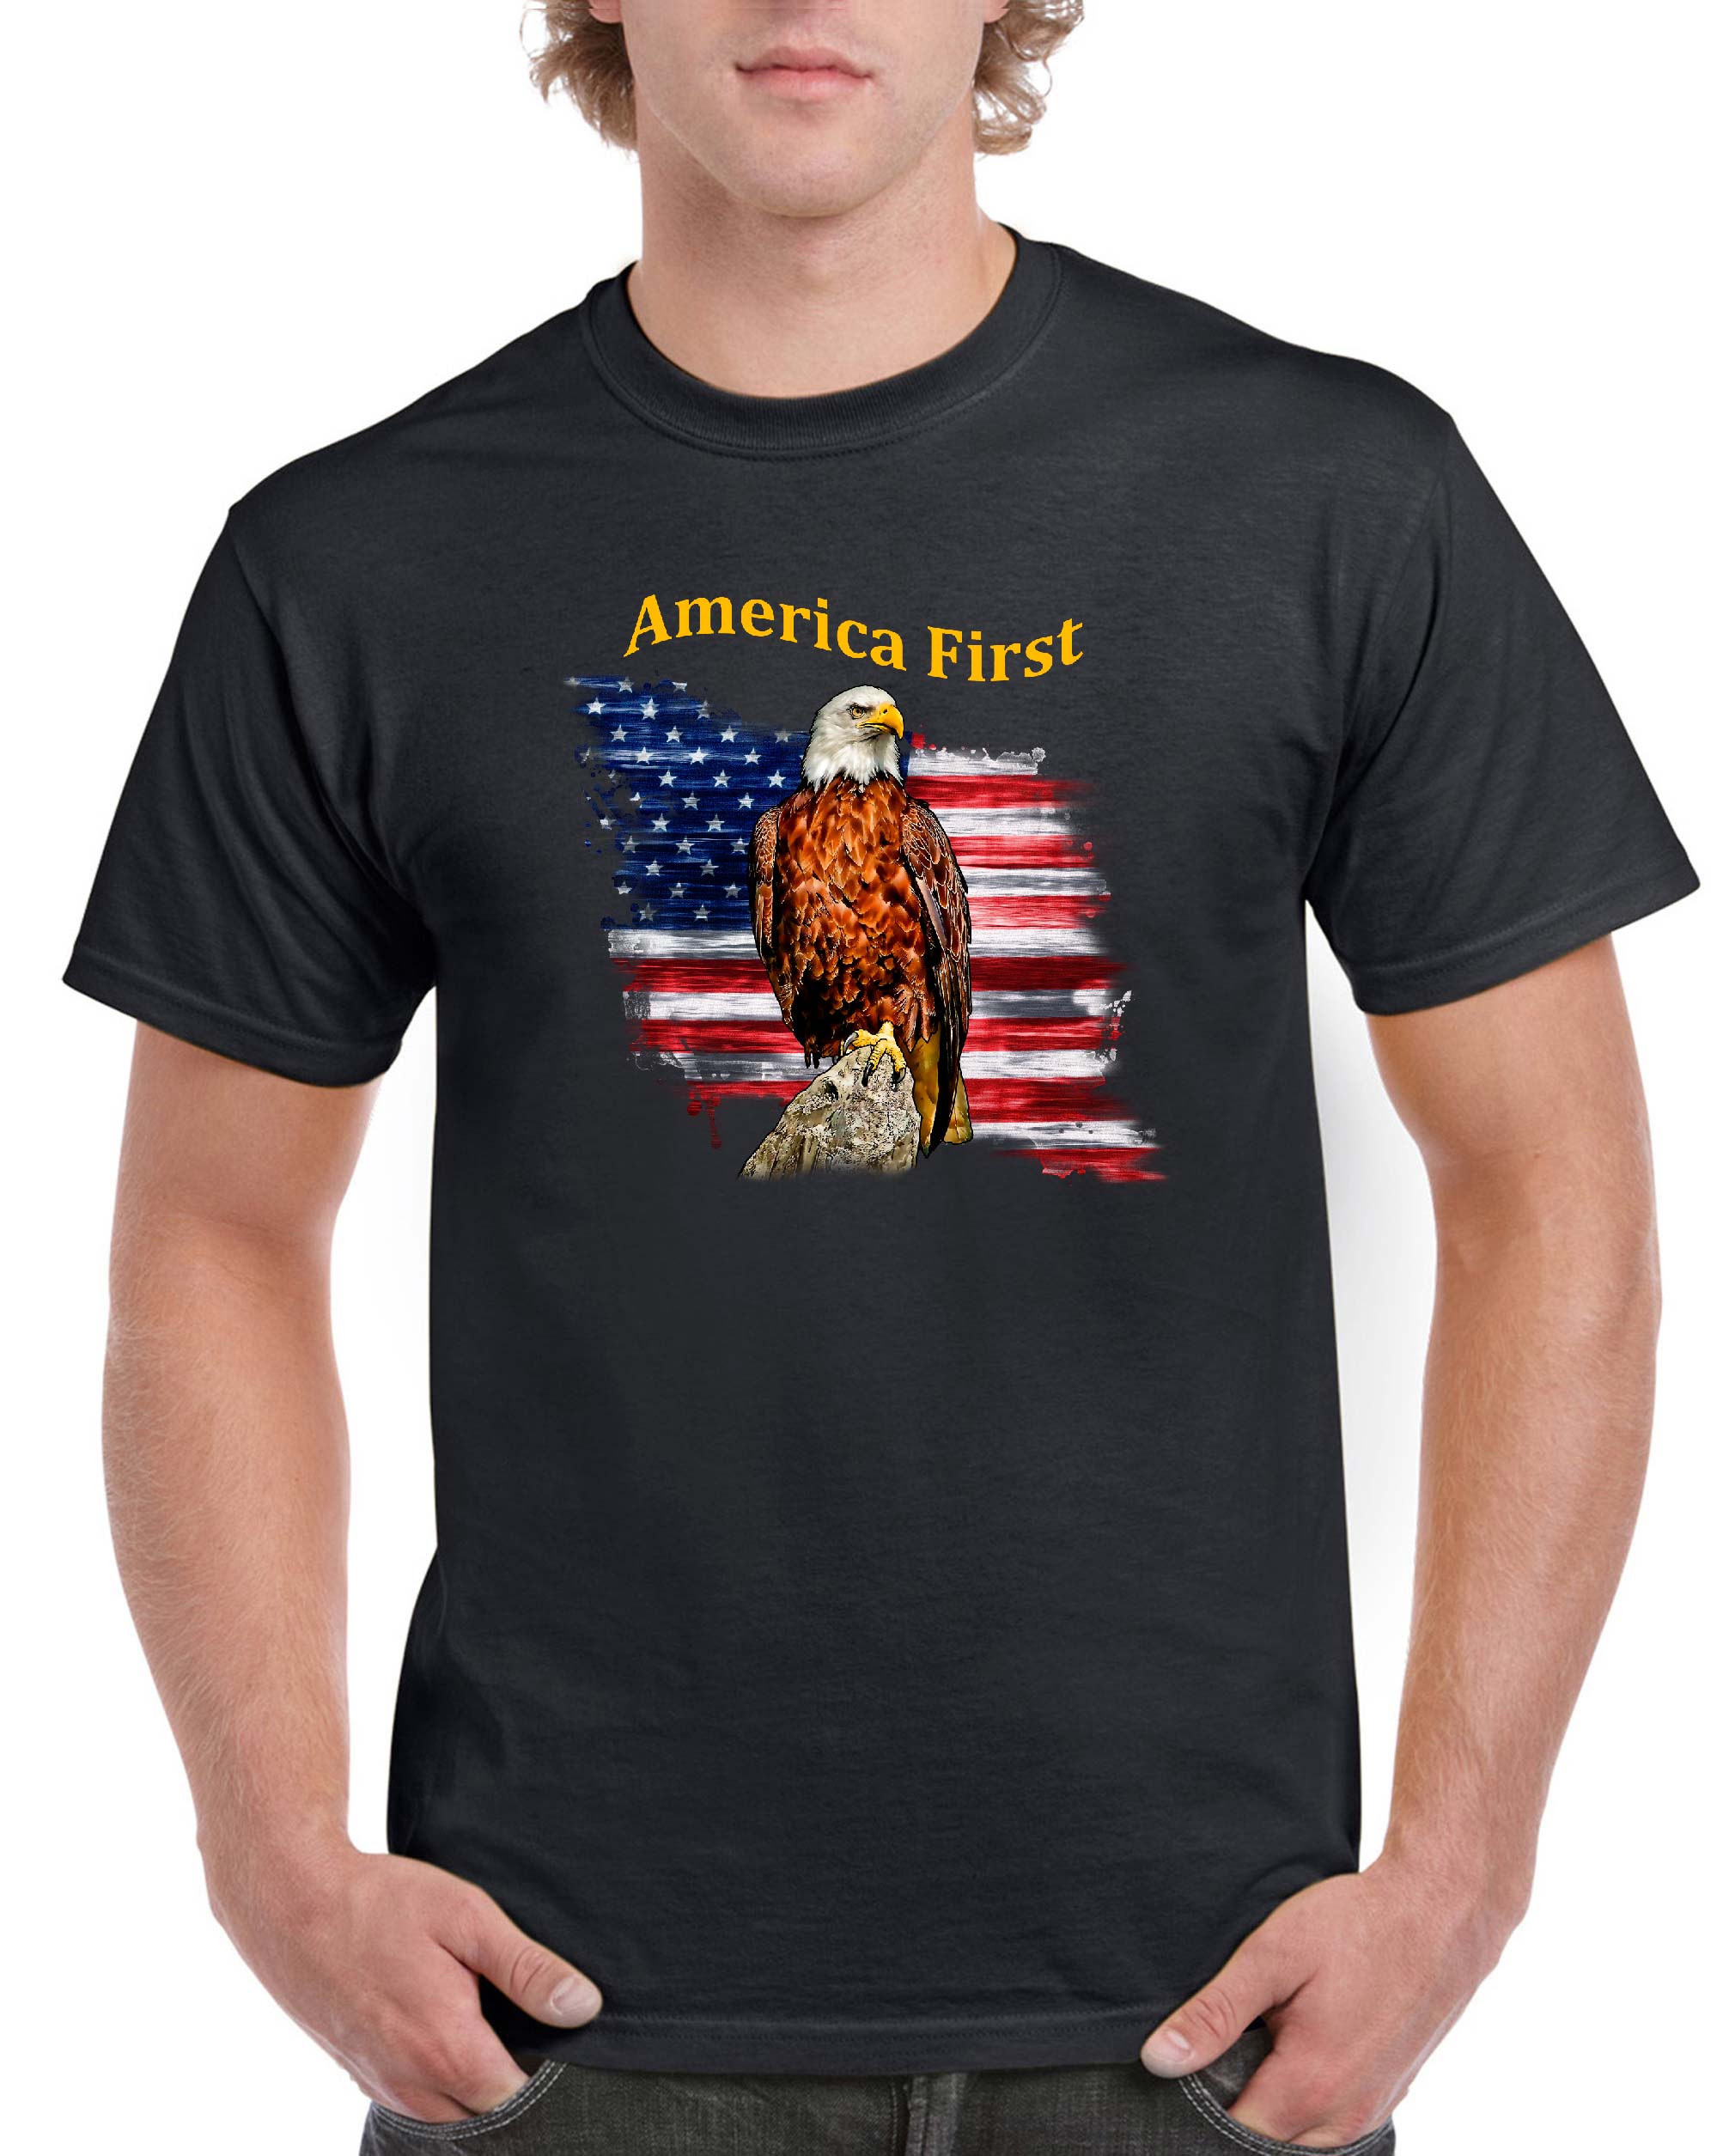 America First Shirt – OVERSTOCK SALE – DOMAGRON